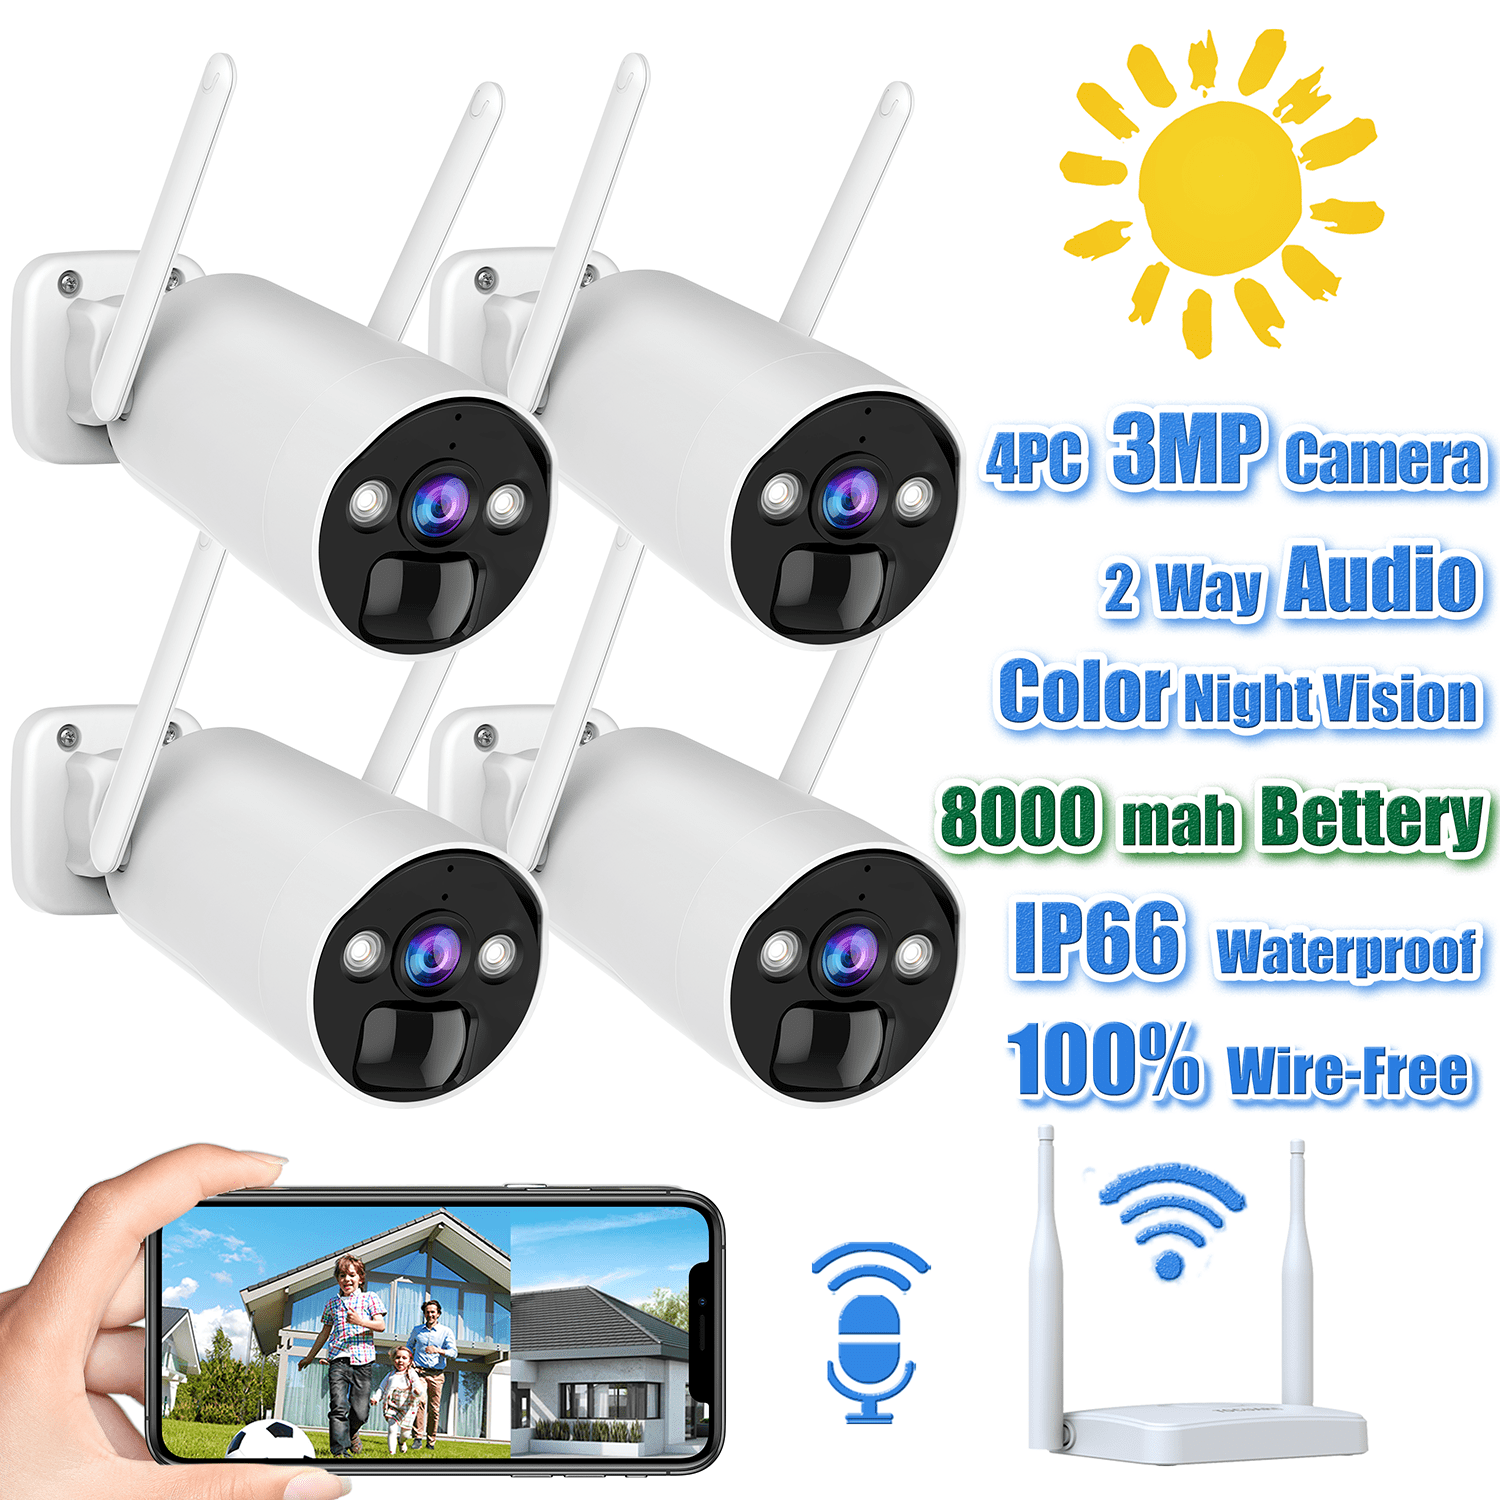 Details about   SmartSF 3MP 8CH Wireless CCTV Camera System Two-way Audio Outdoor Security kit 